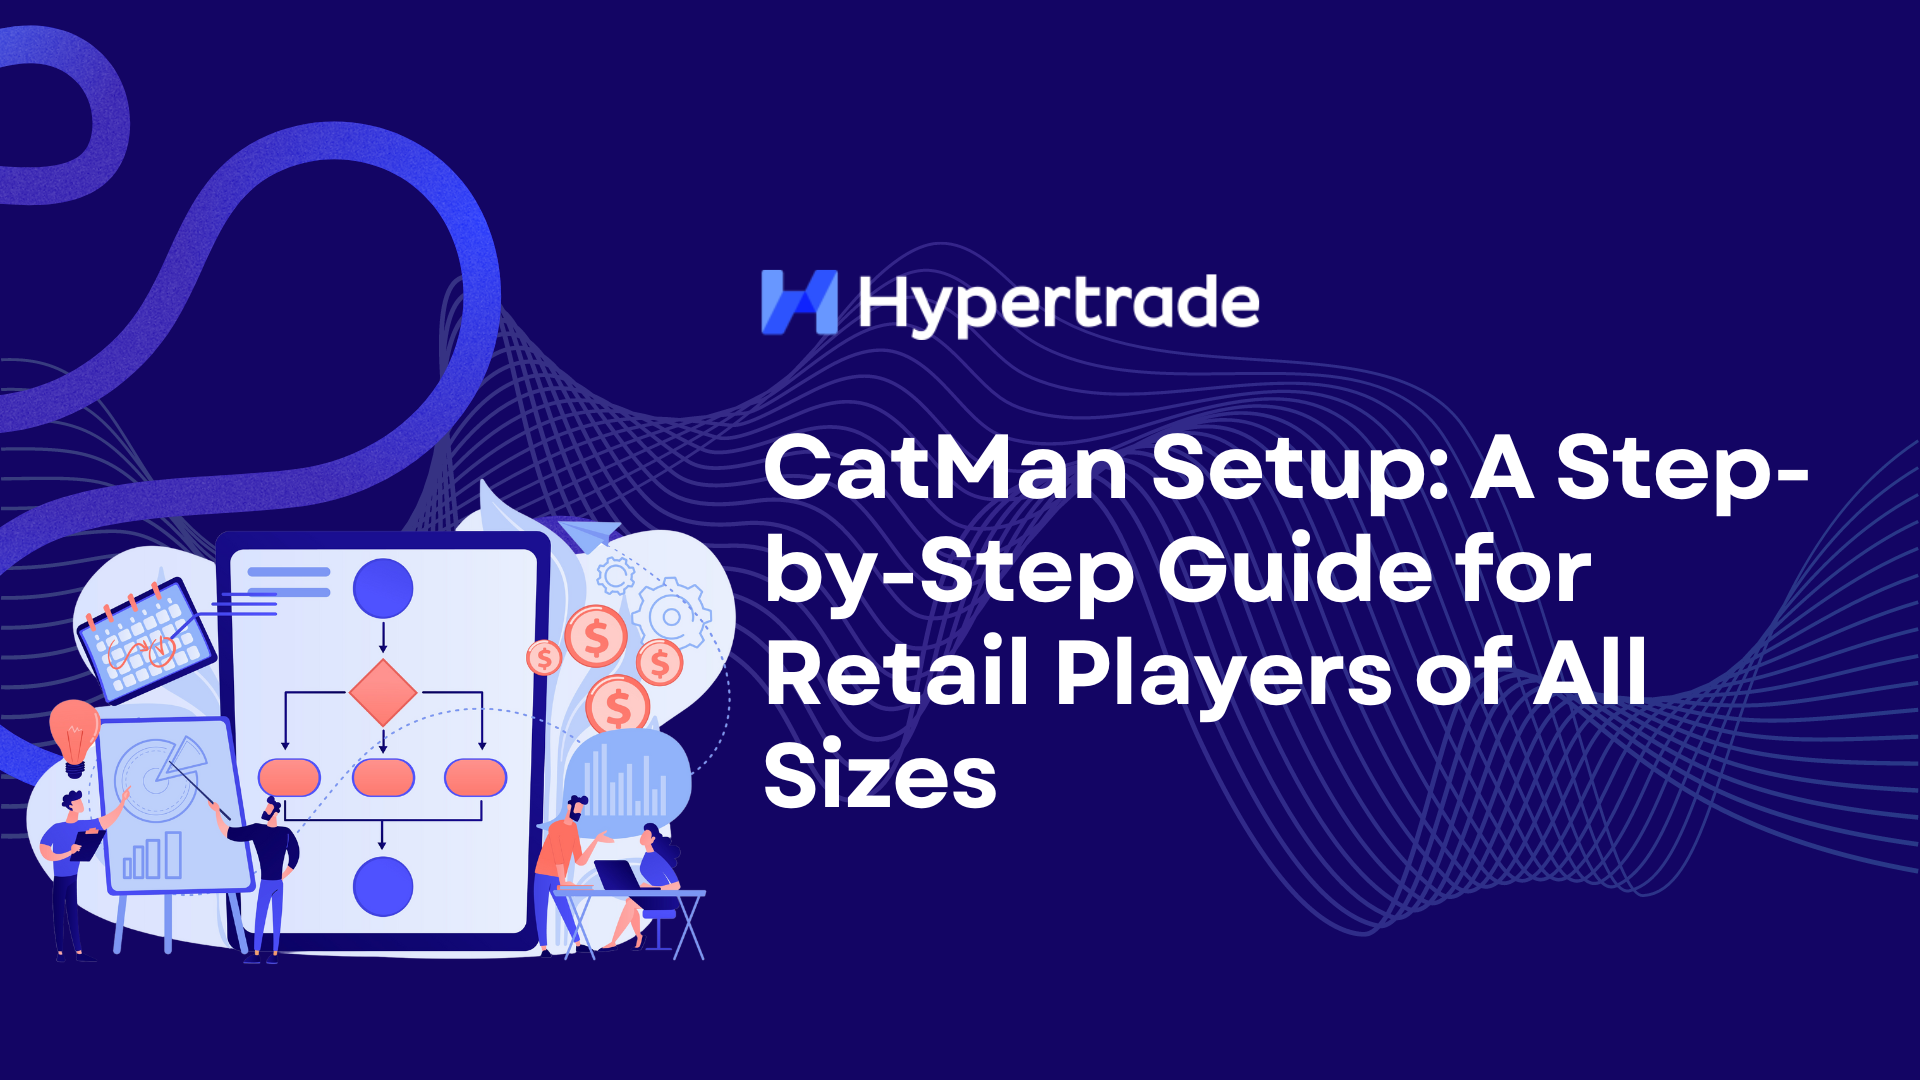 CatMan Setup: A Step-by-Step Guide for Retail Players of All Sizes